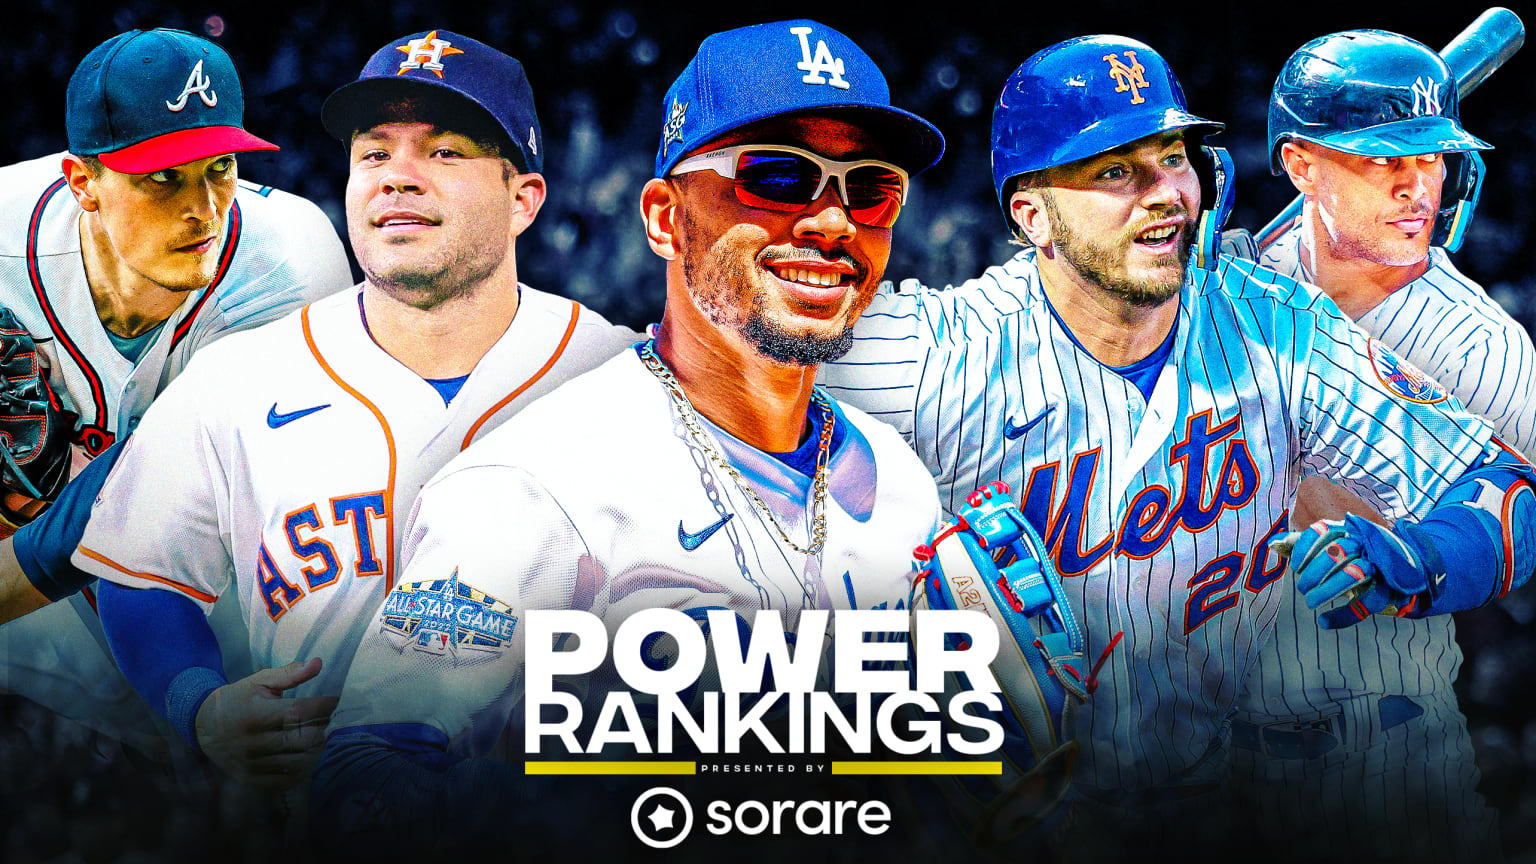 Photos of Max Fried, Jose Altuve, Mookie Betts, Pete Alonso and Giancarlo Stanton shown behind a Power Rankings logo